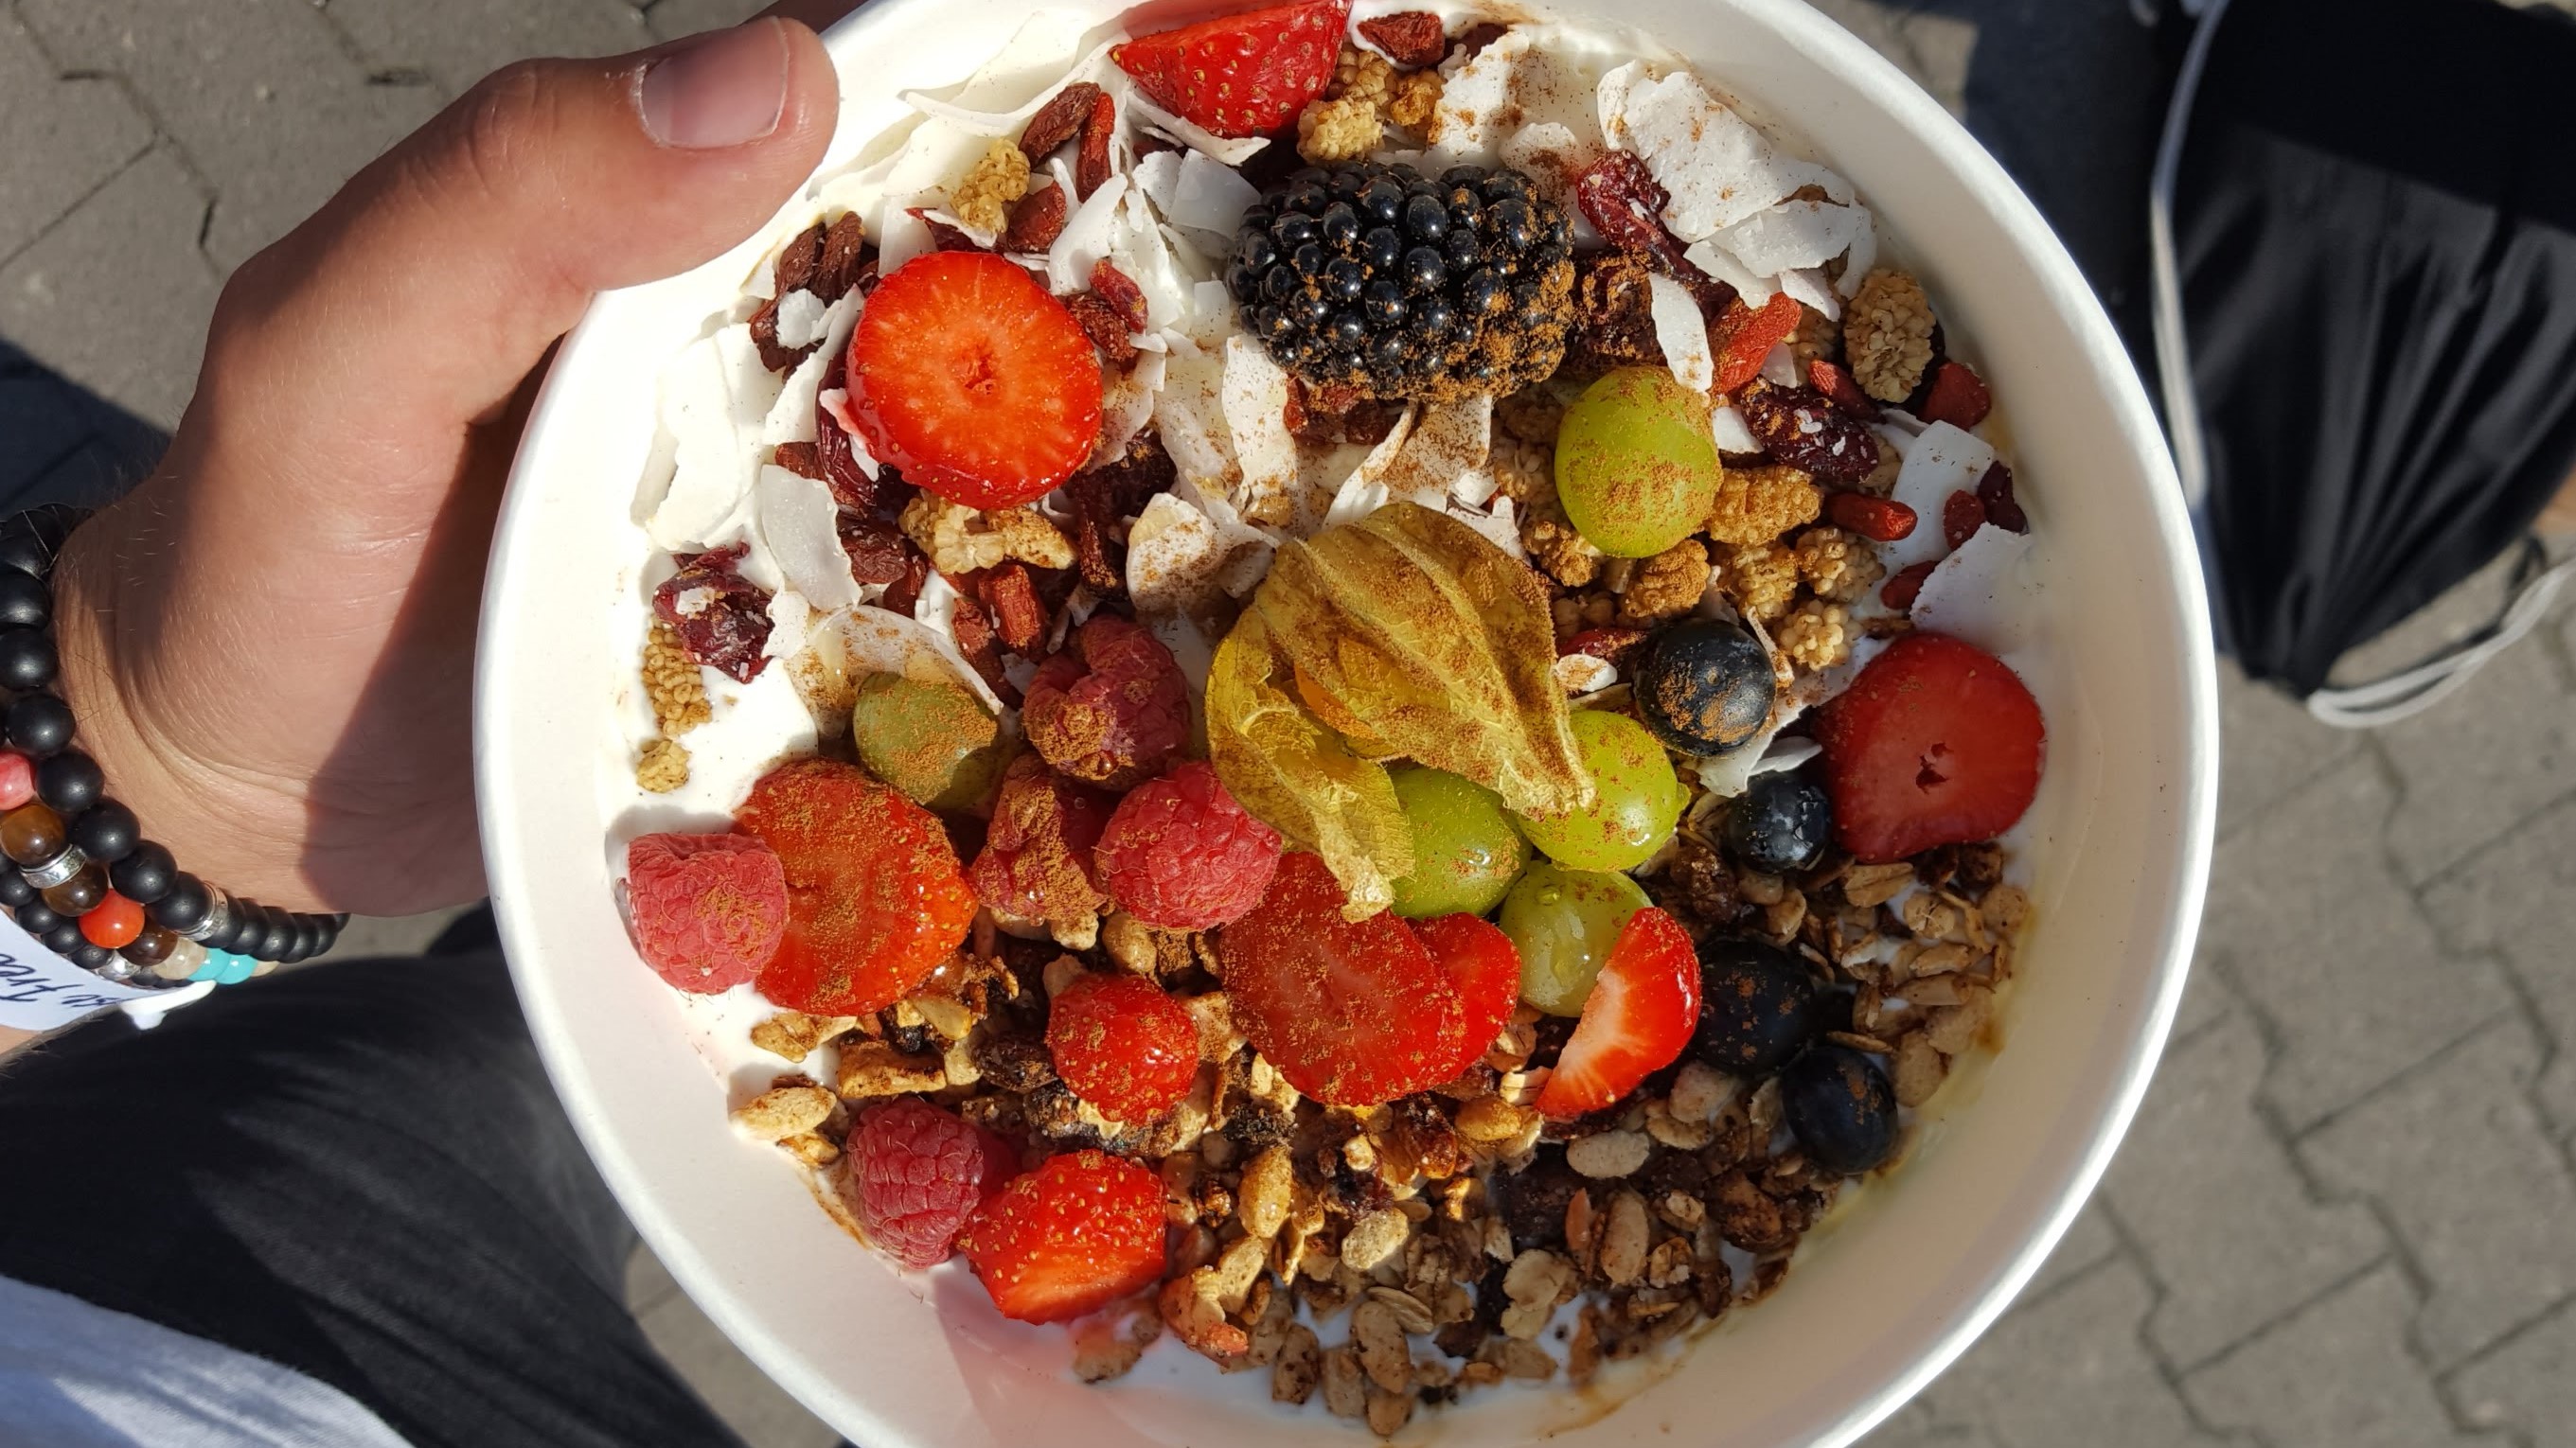 Breakfast Special Berlin. Milch & Zucker. Power Müsli bowl. Fresh fruits, nuts, agave syrup, soy, oat or almond milk.